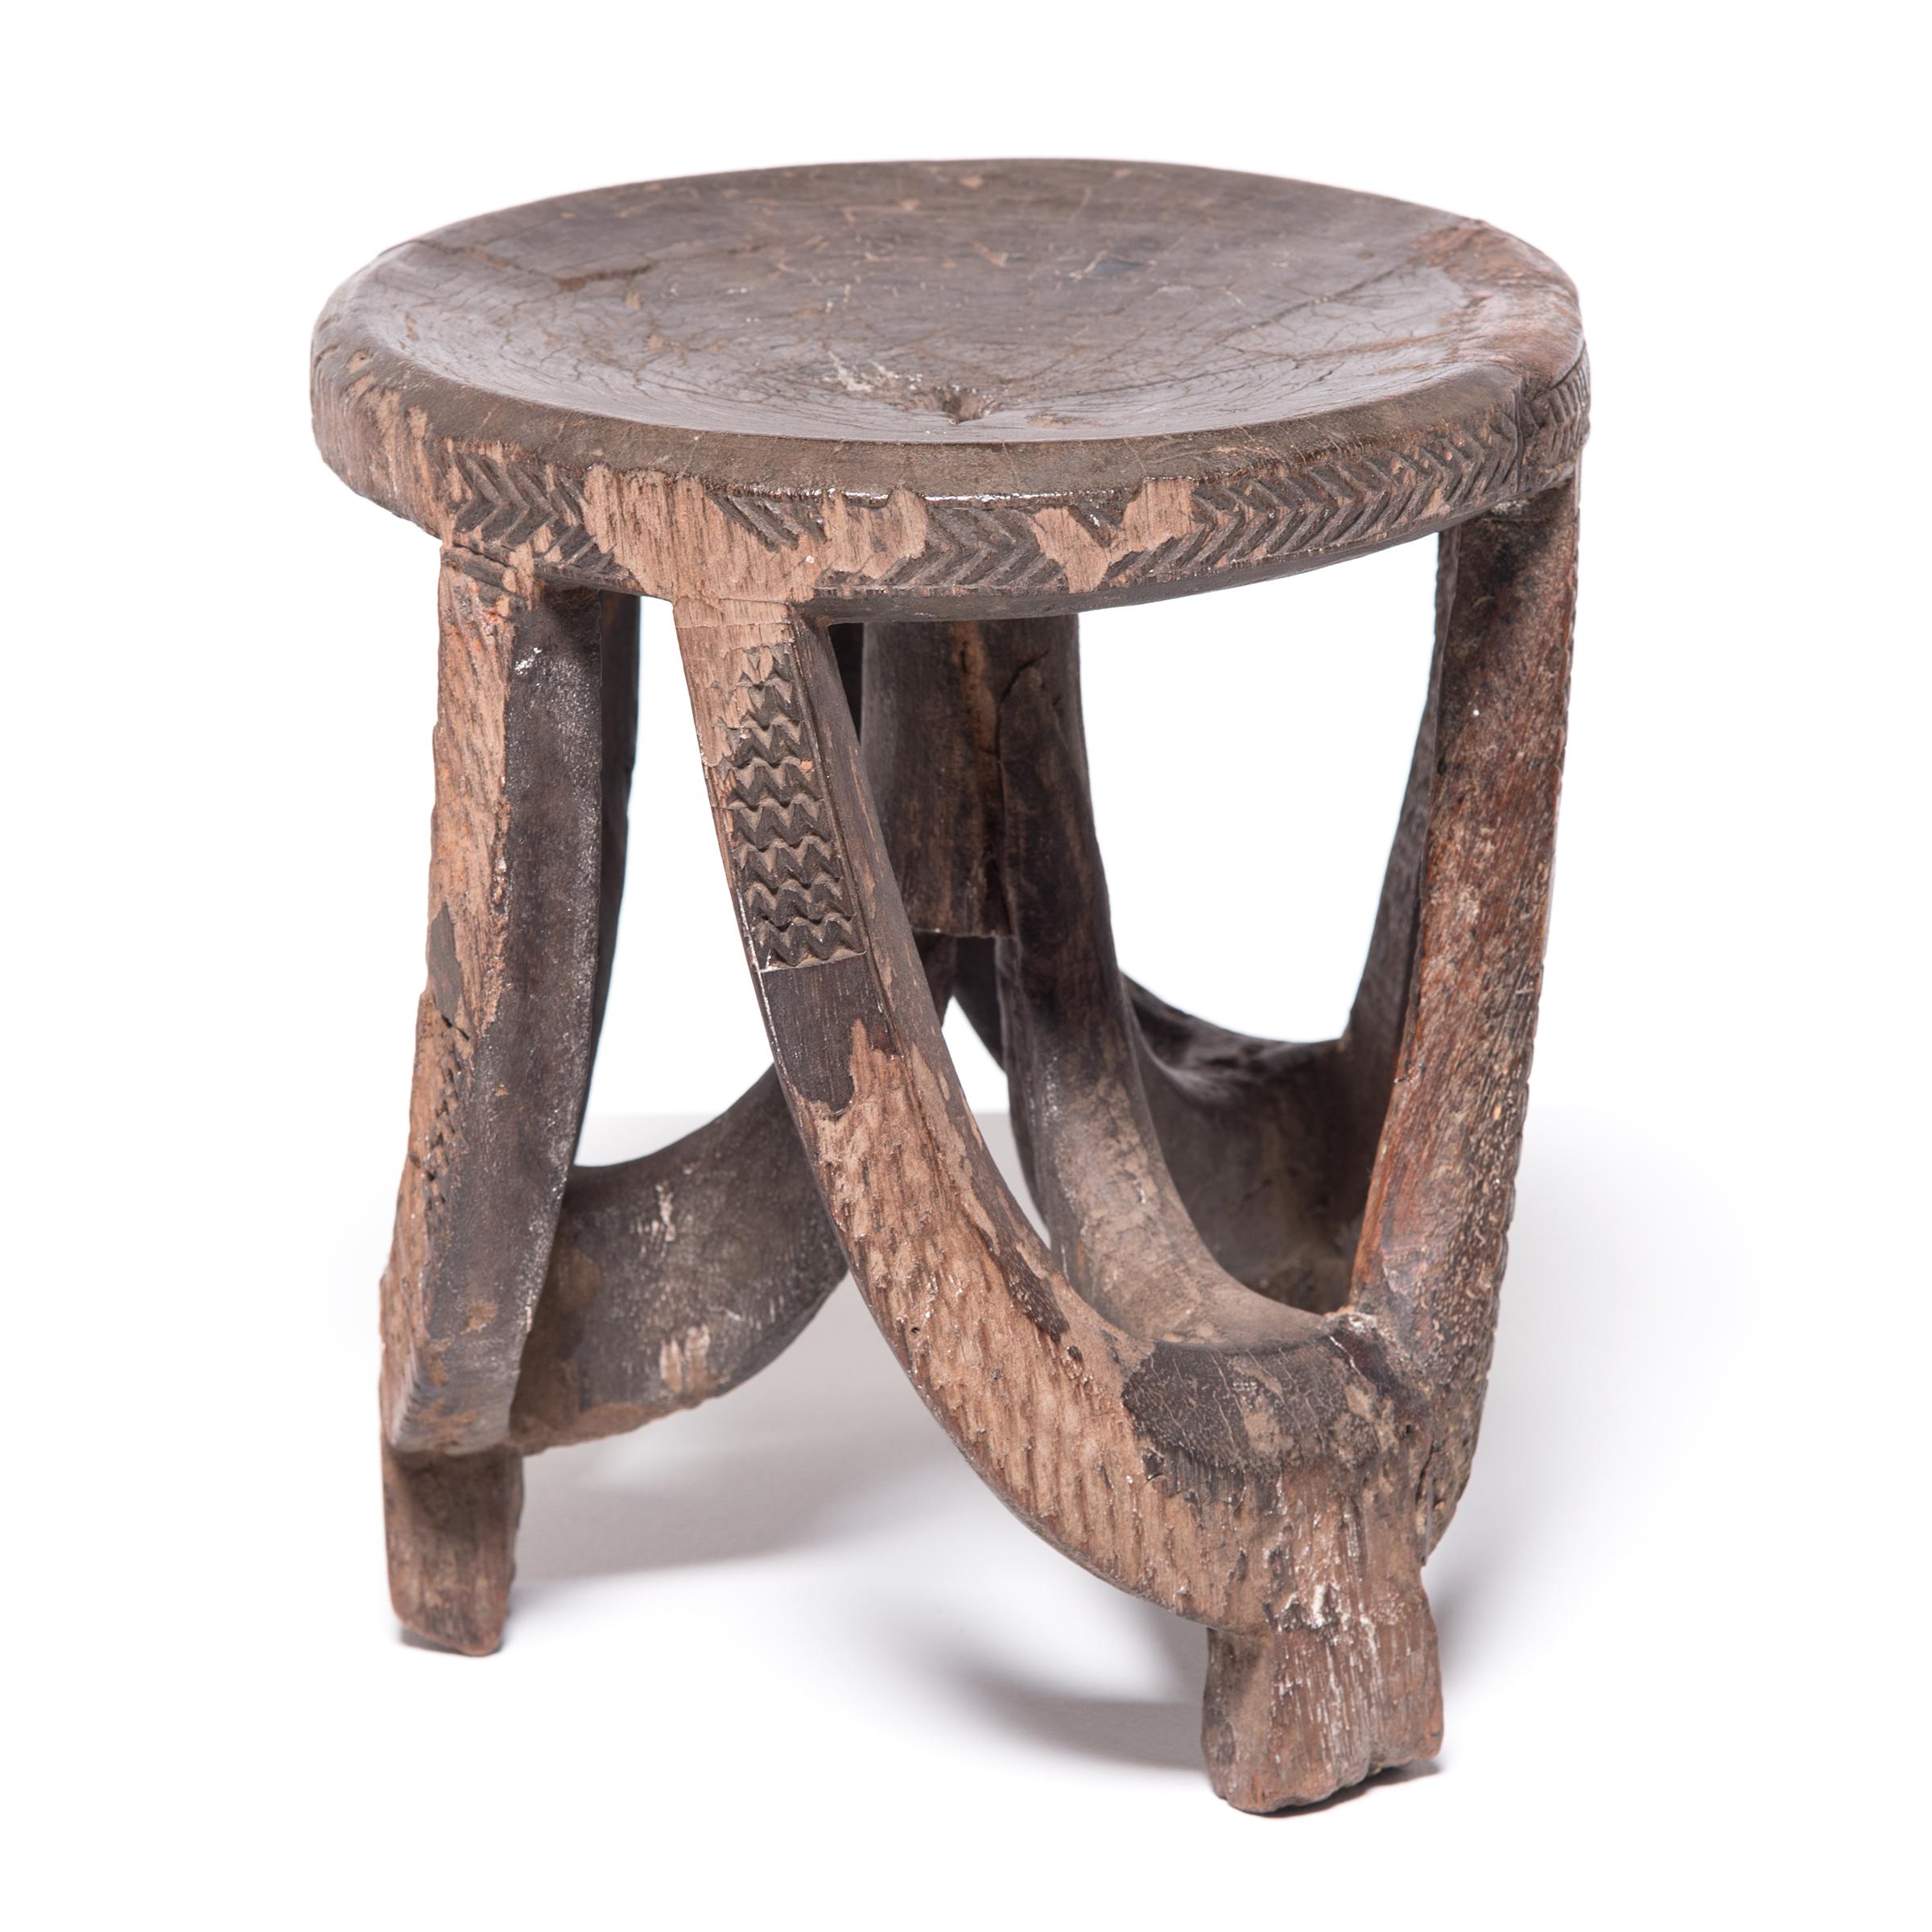 Most likely created by artisans of the Hehe peoples of Tanzania, this tripod stool embodies wonderful movement in its sweeping form. Playful lines drawn by graceful arched legs contrast the stool's clean, round surface. Incised chevron patterns fade